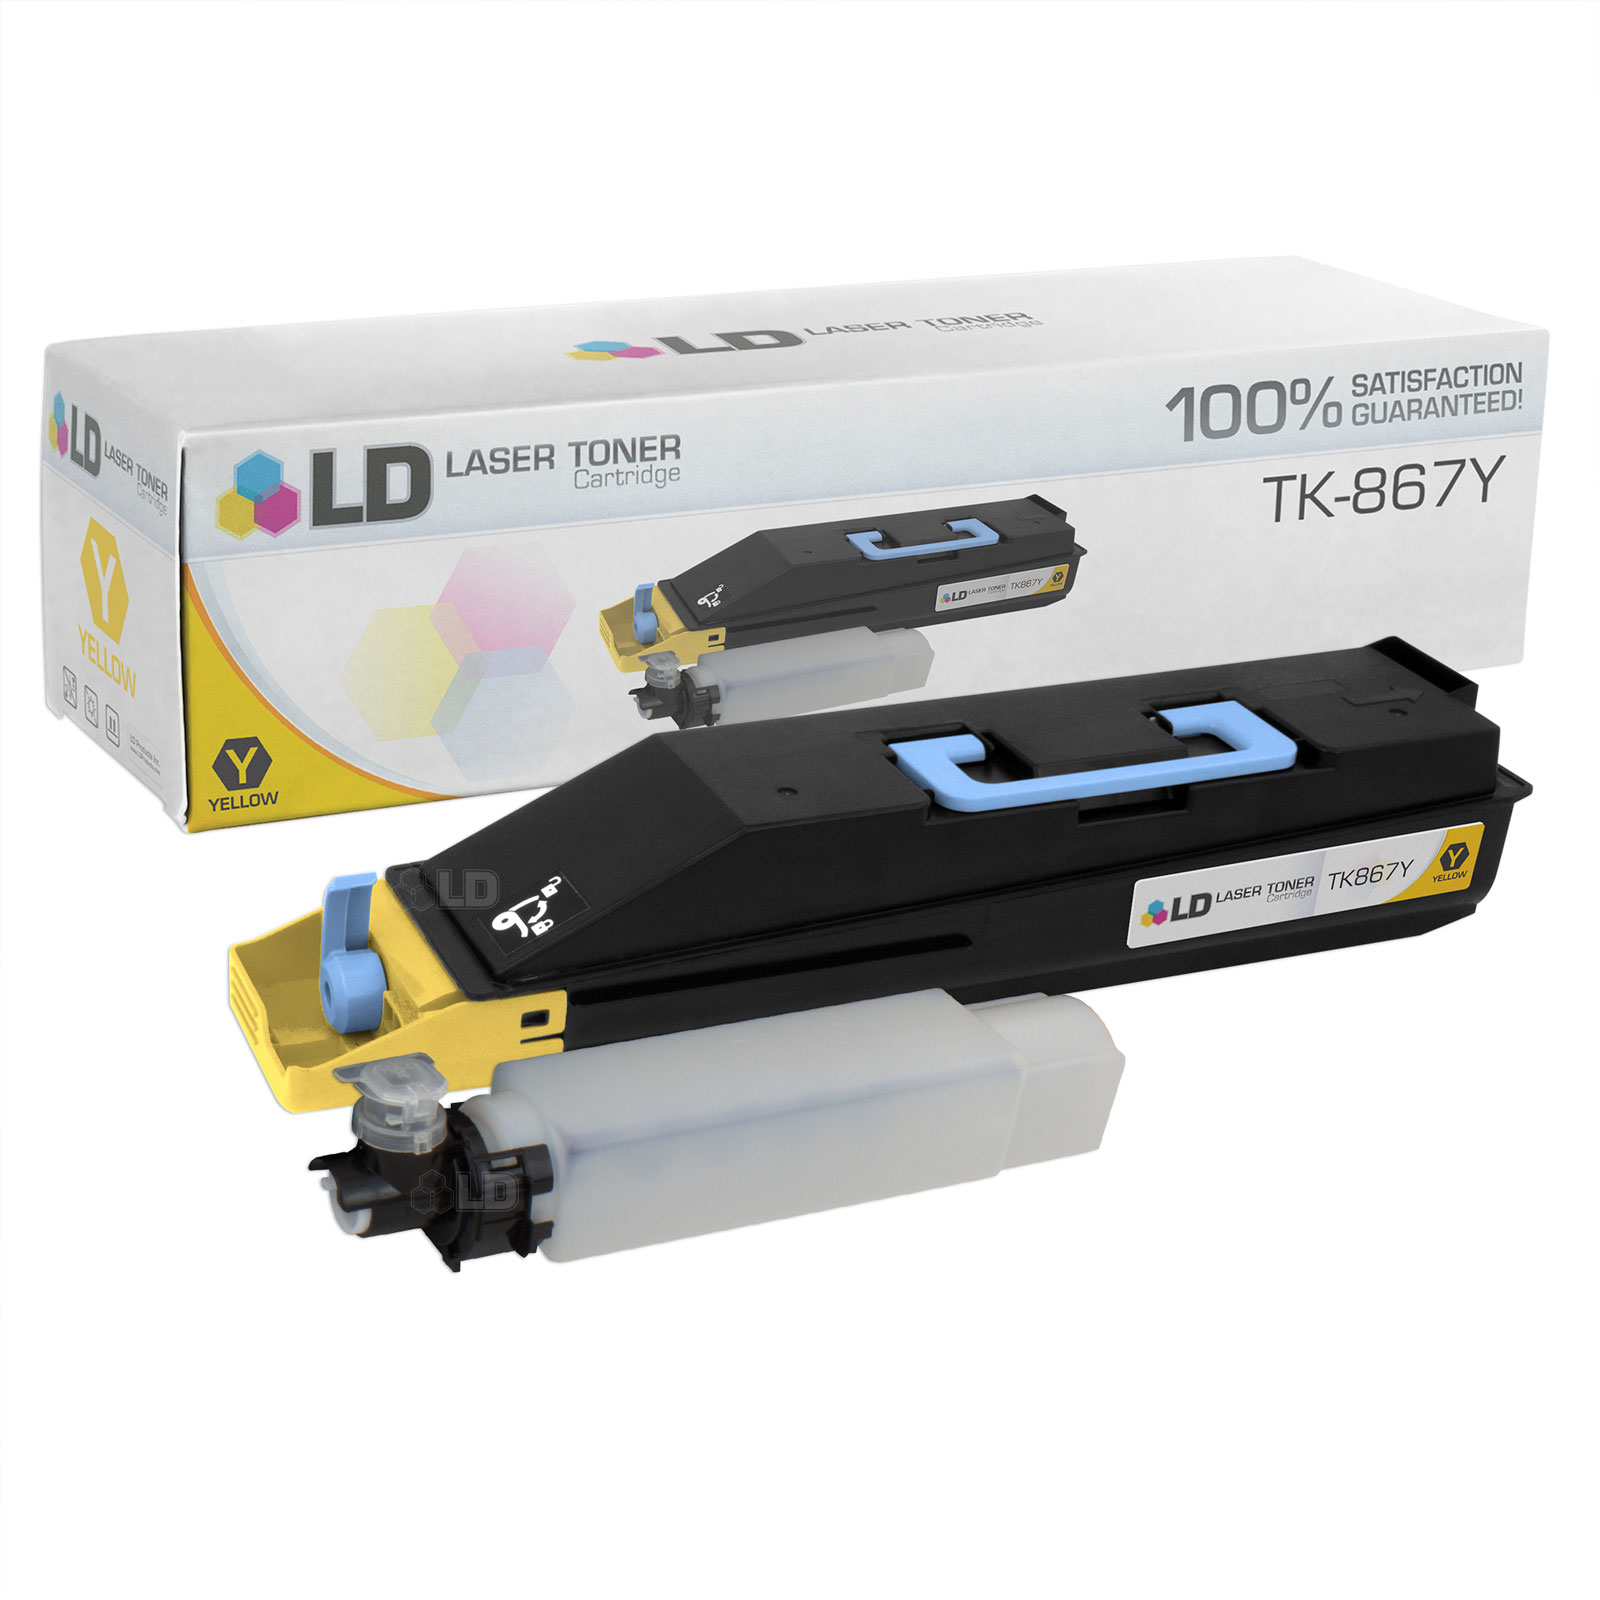 LD Compatible Replacement for Kyocera Mita TK-867Y Yellow Laser Toner Cartridge for use in Kyocera Mita TASKalfa 250ci, and 300ci s - image 1 of 1